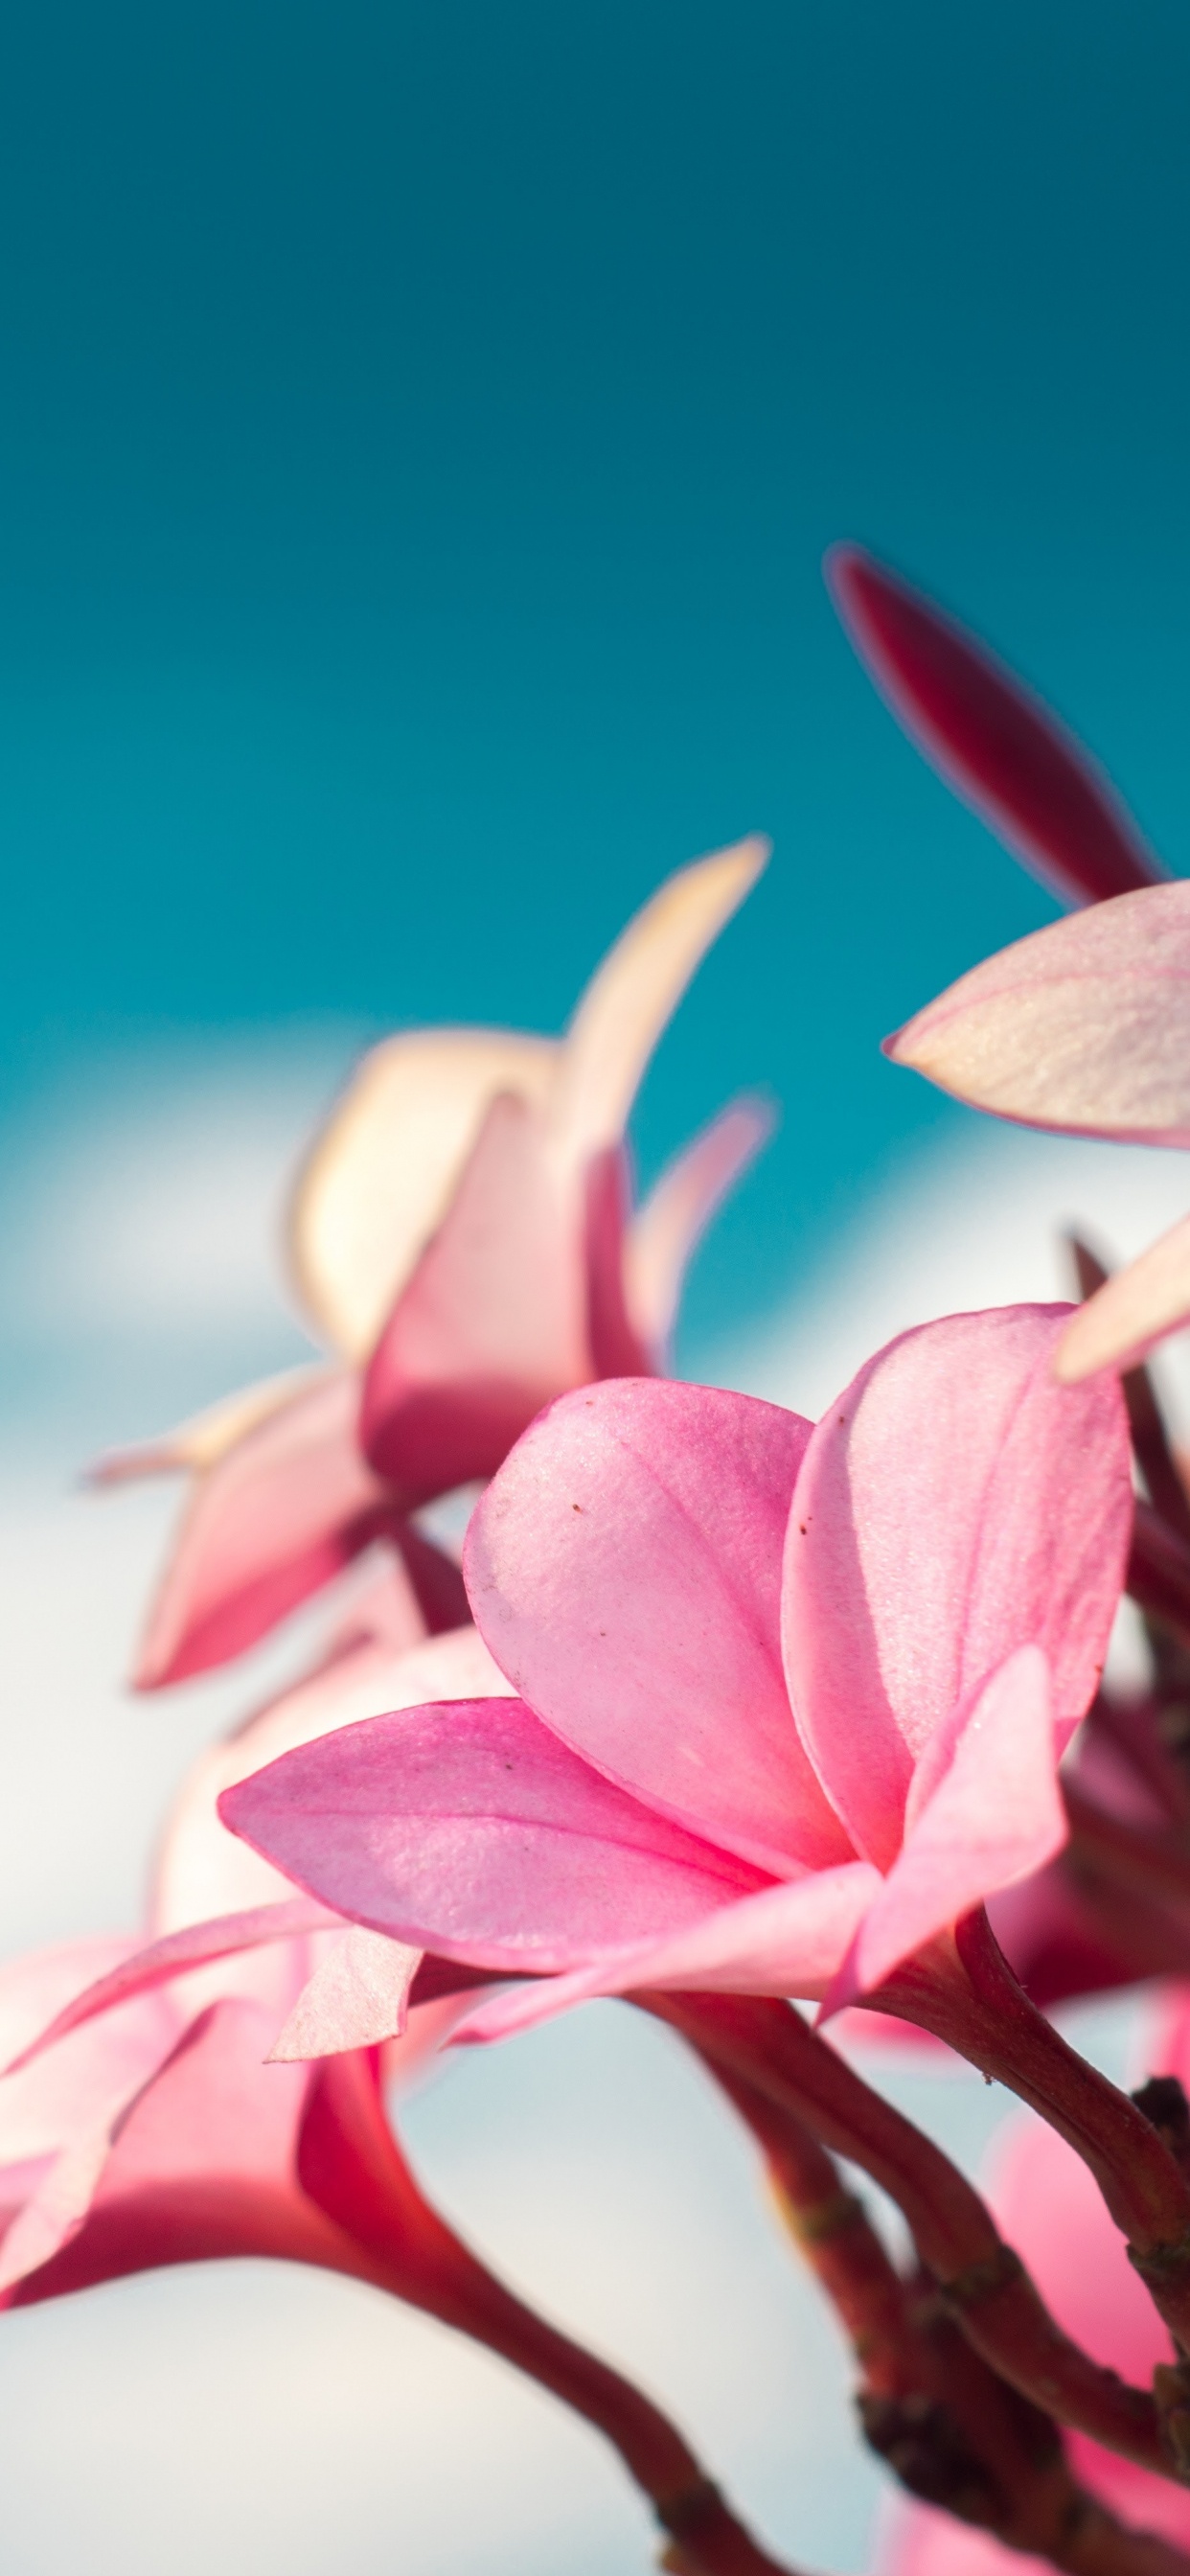 Pink and White Flower in Close up Photography. Wallpaper in 1242x2688 Resolution